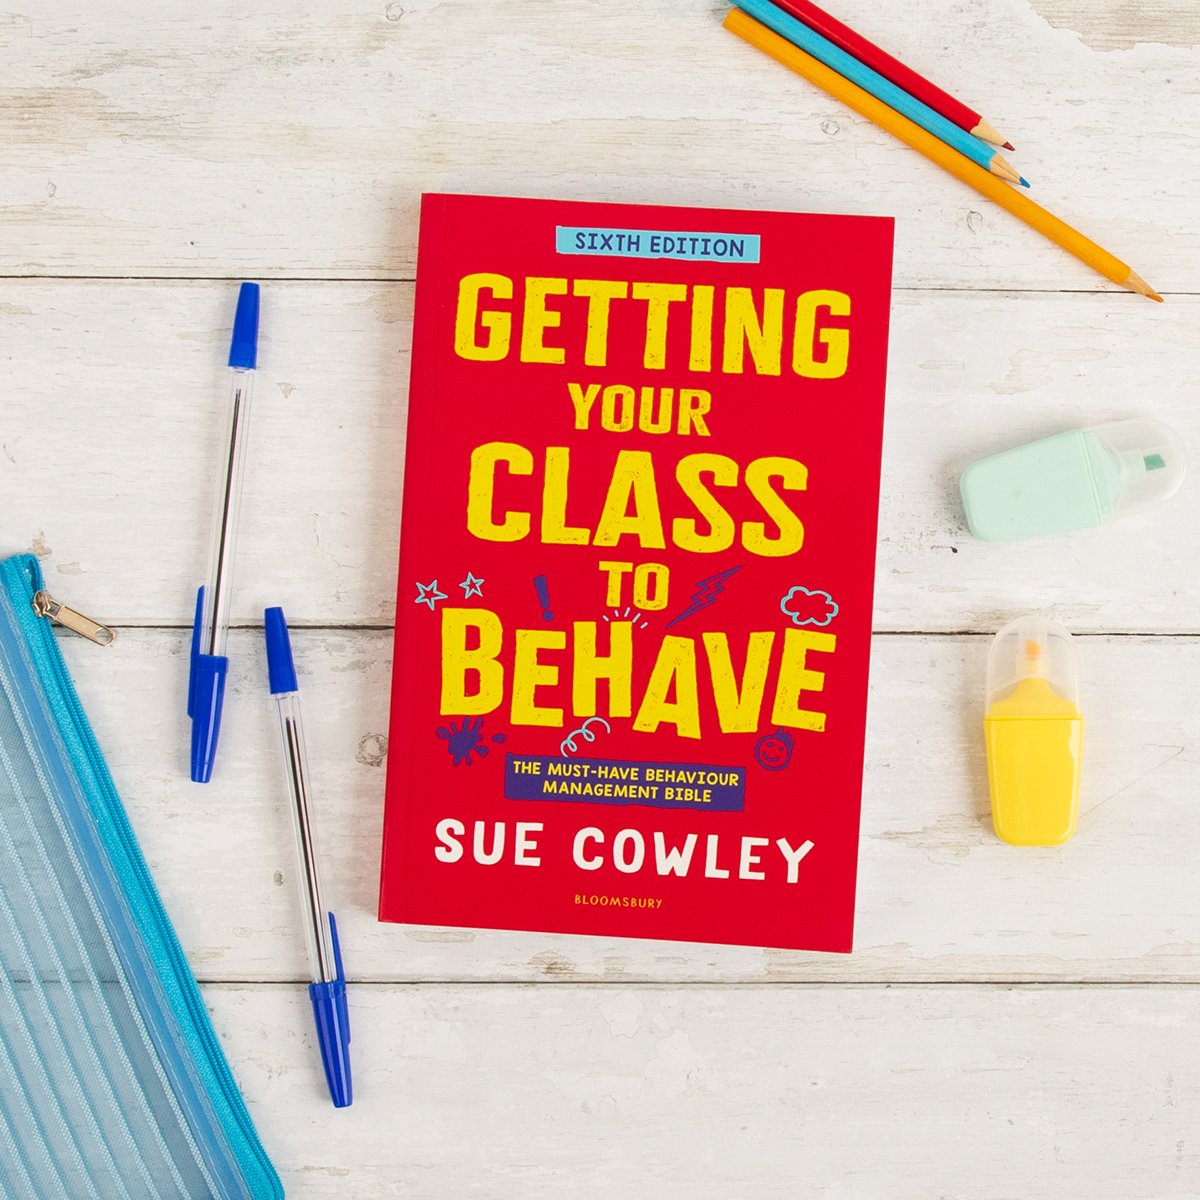 It's very kind of people to discuss my #behaviour book on here. Thank you! New edition coming out at the end of May with a brand new title. ⬇️😘